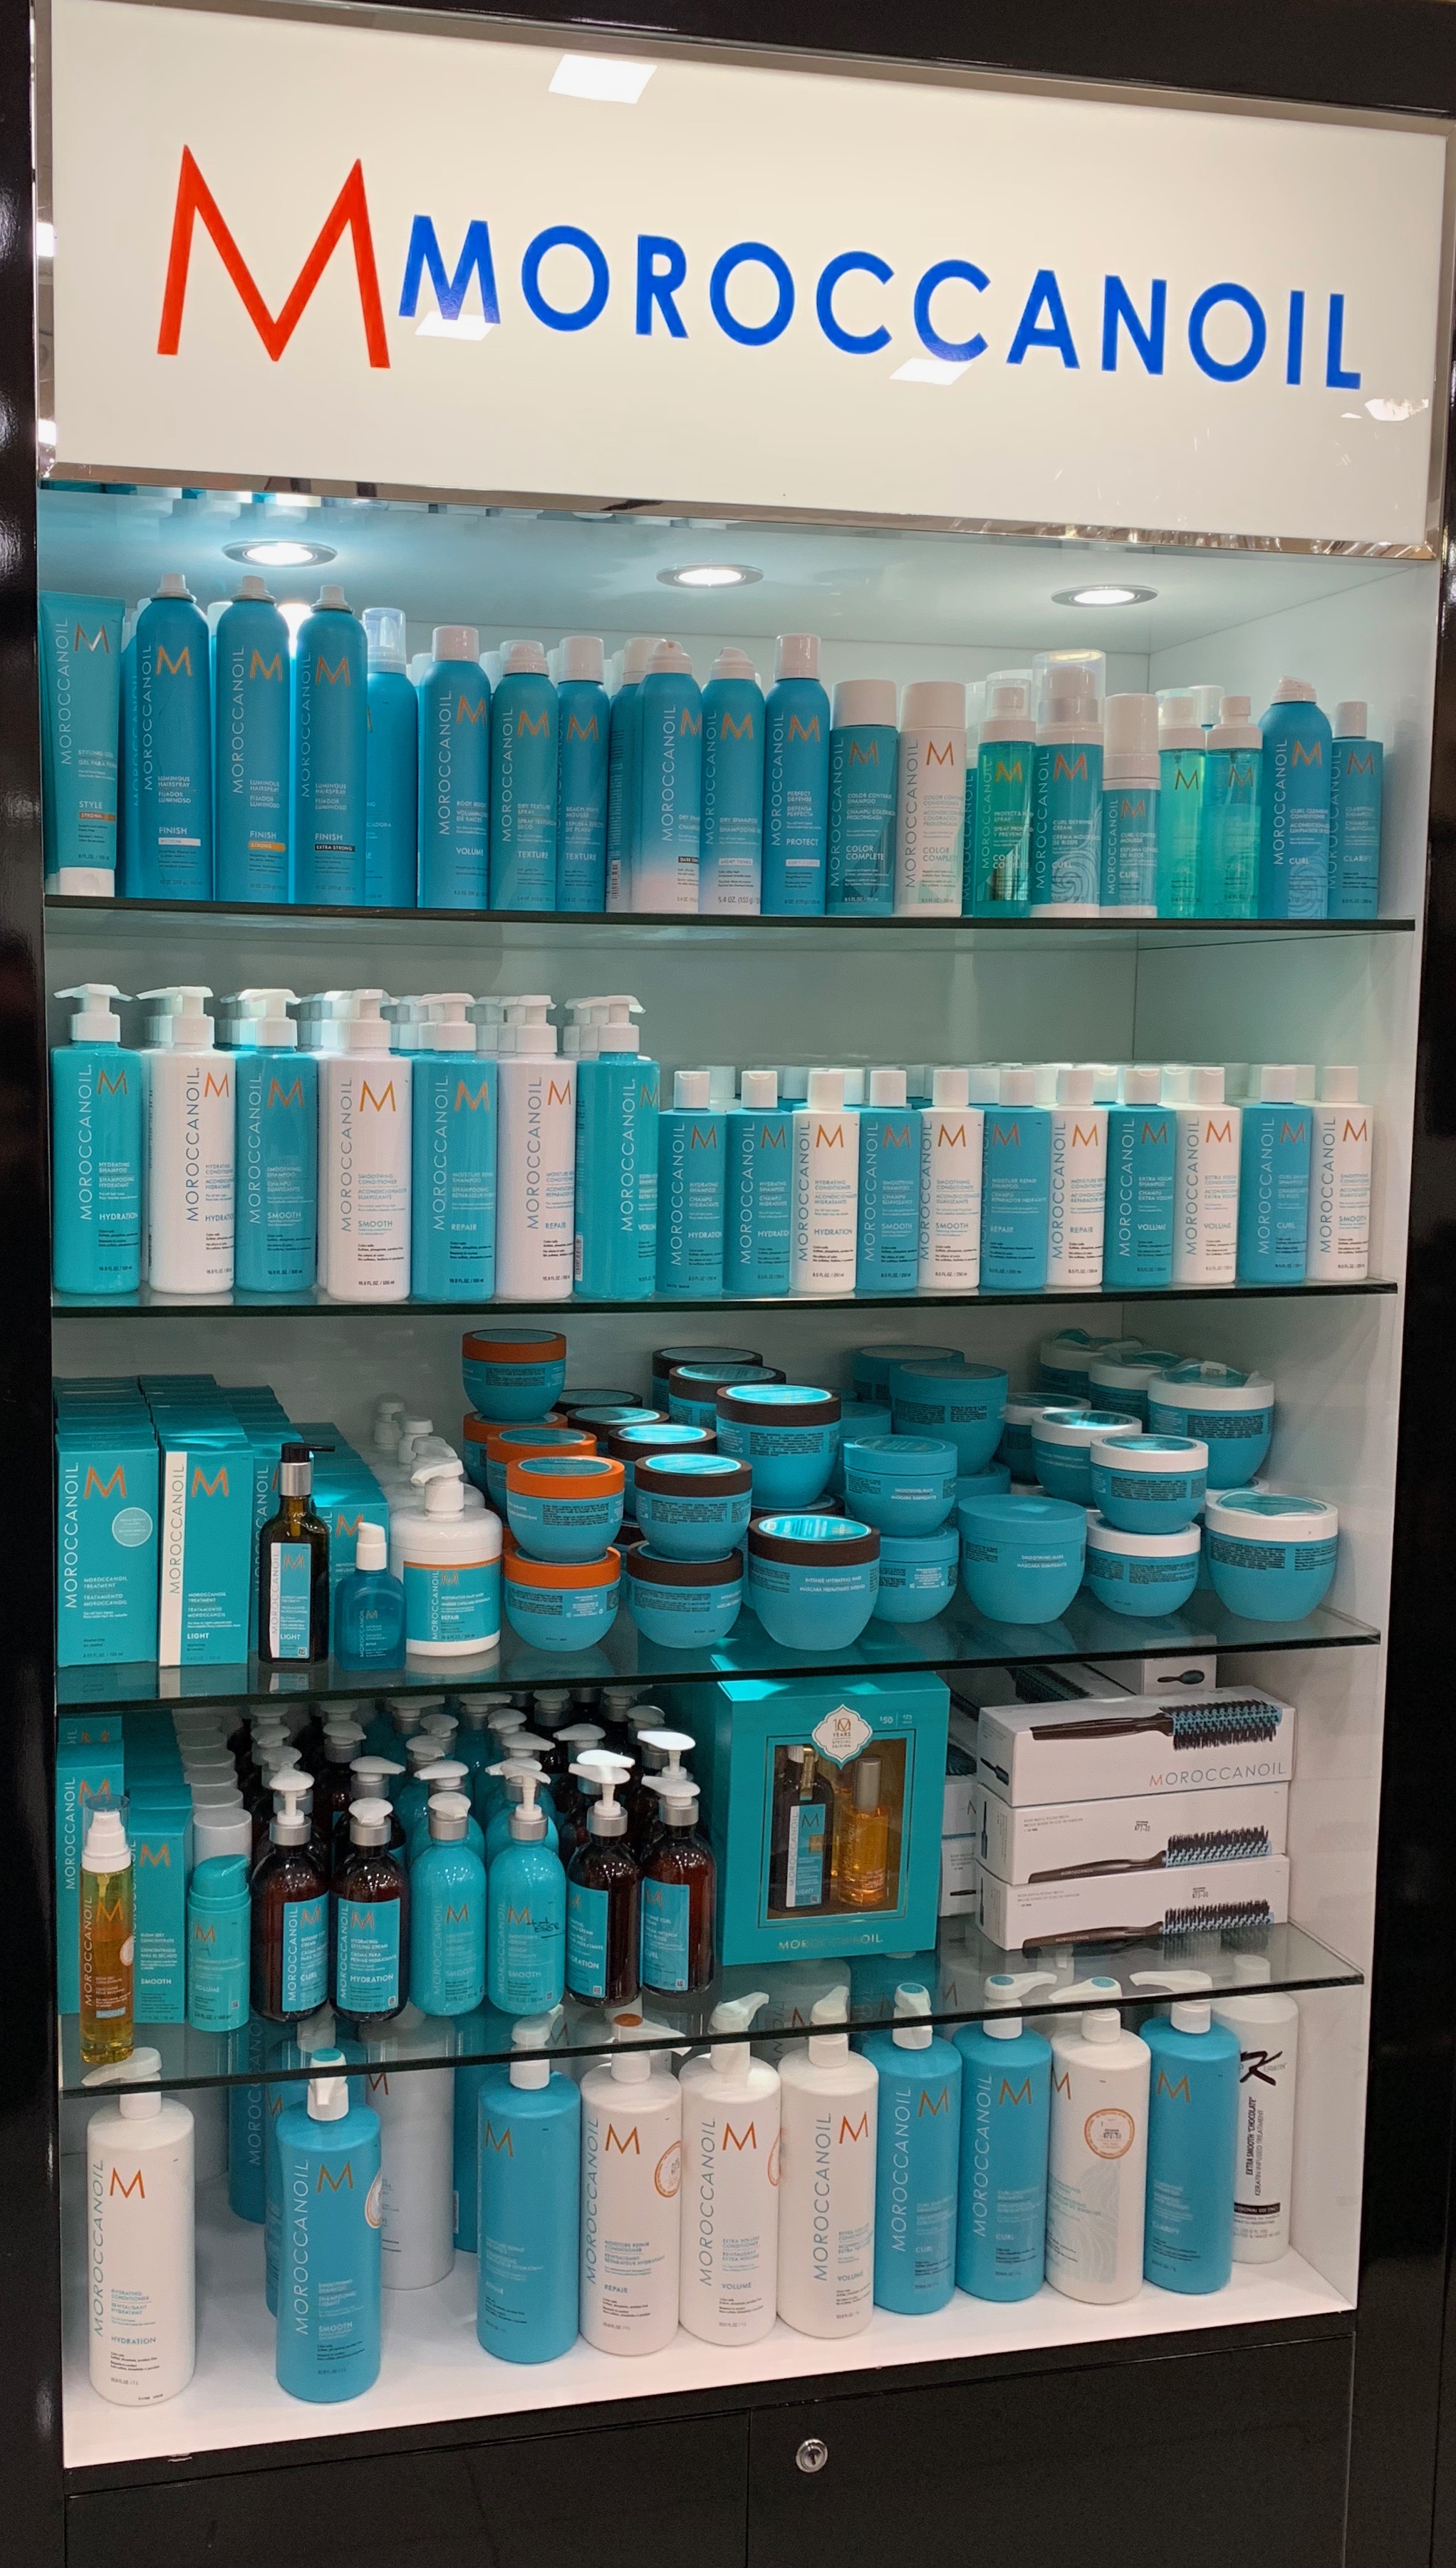 MOROCCAN OIL PRODUCTS